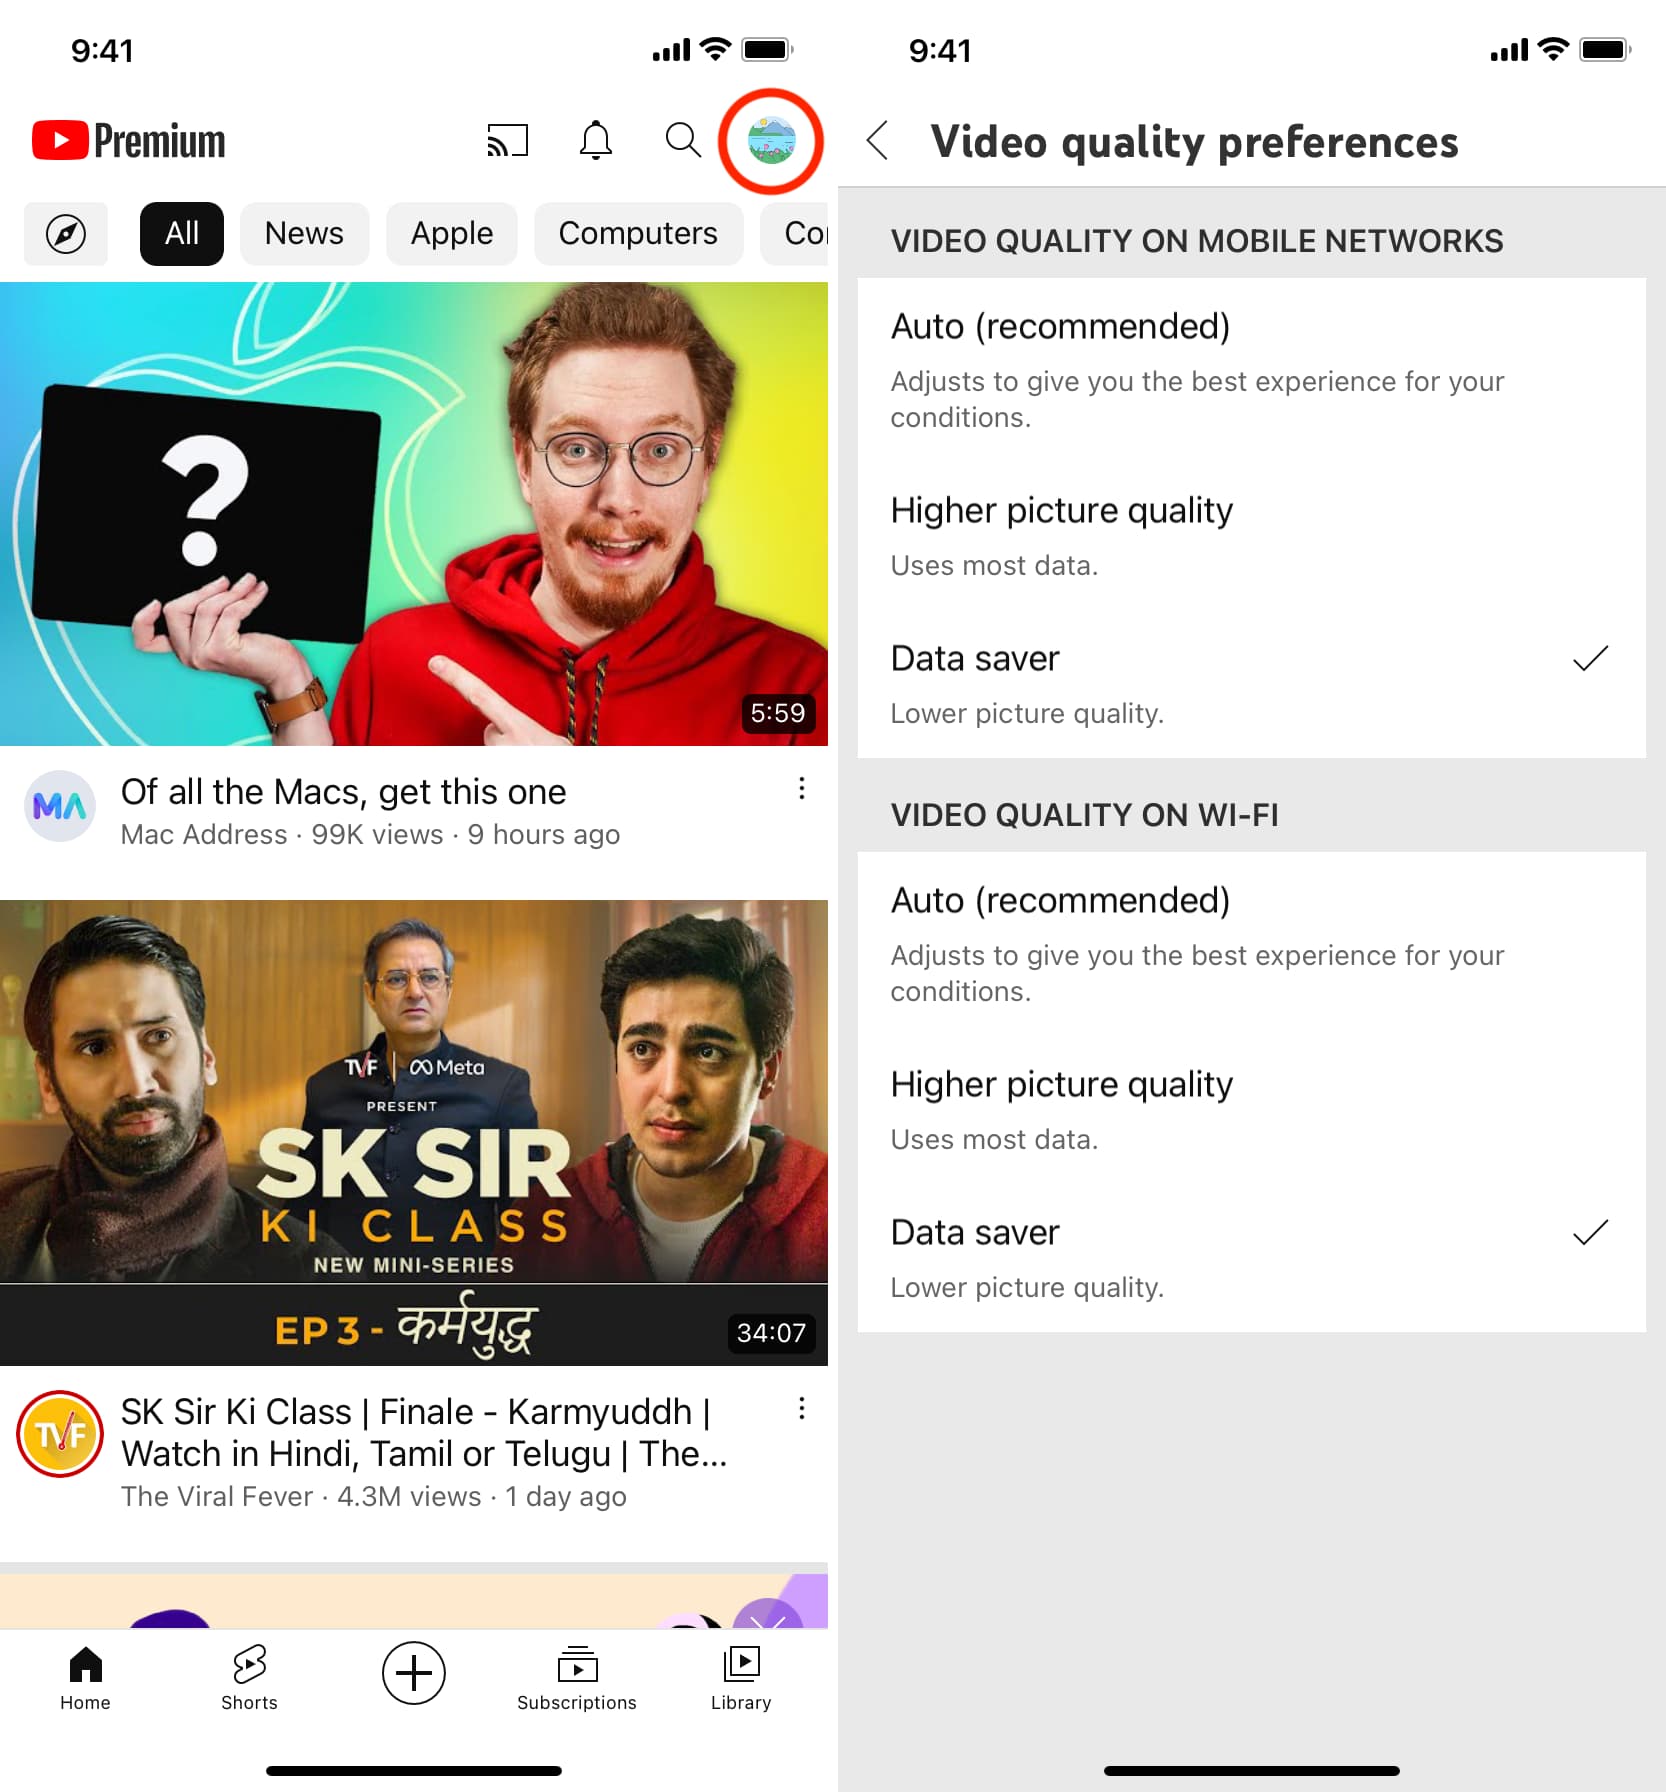 Video quality preferences in YouTube app for all videos